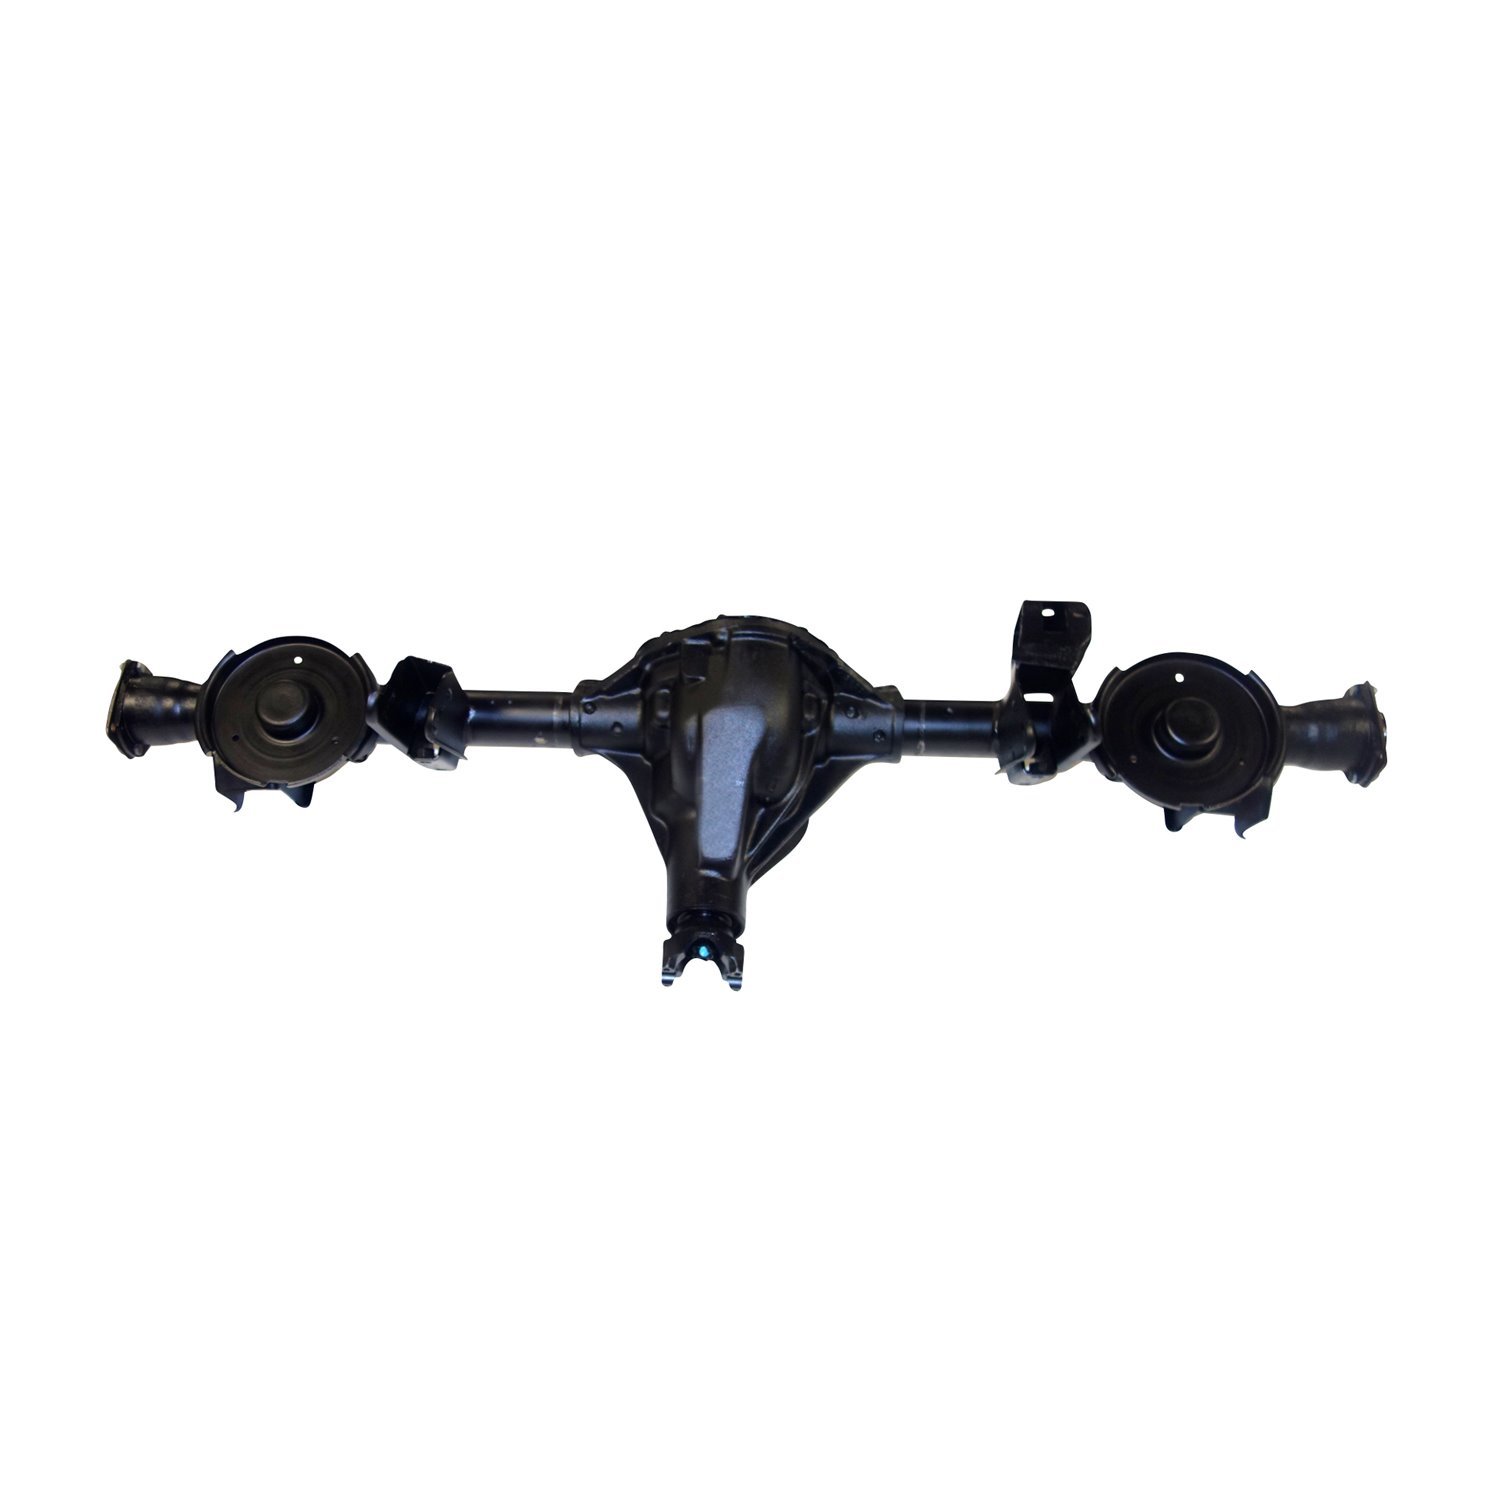 Remanufactured Complete Axle Assembly for Dana 44 06-10